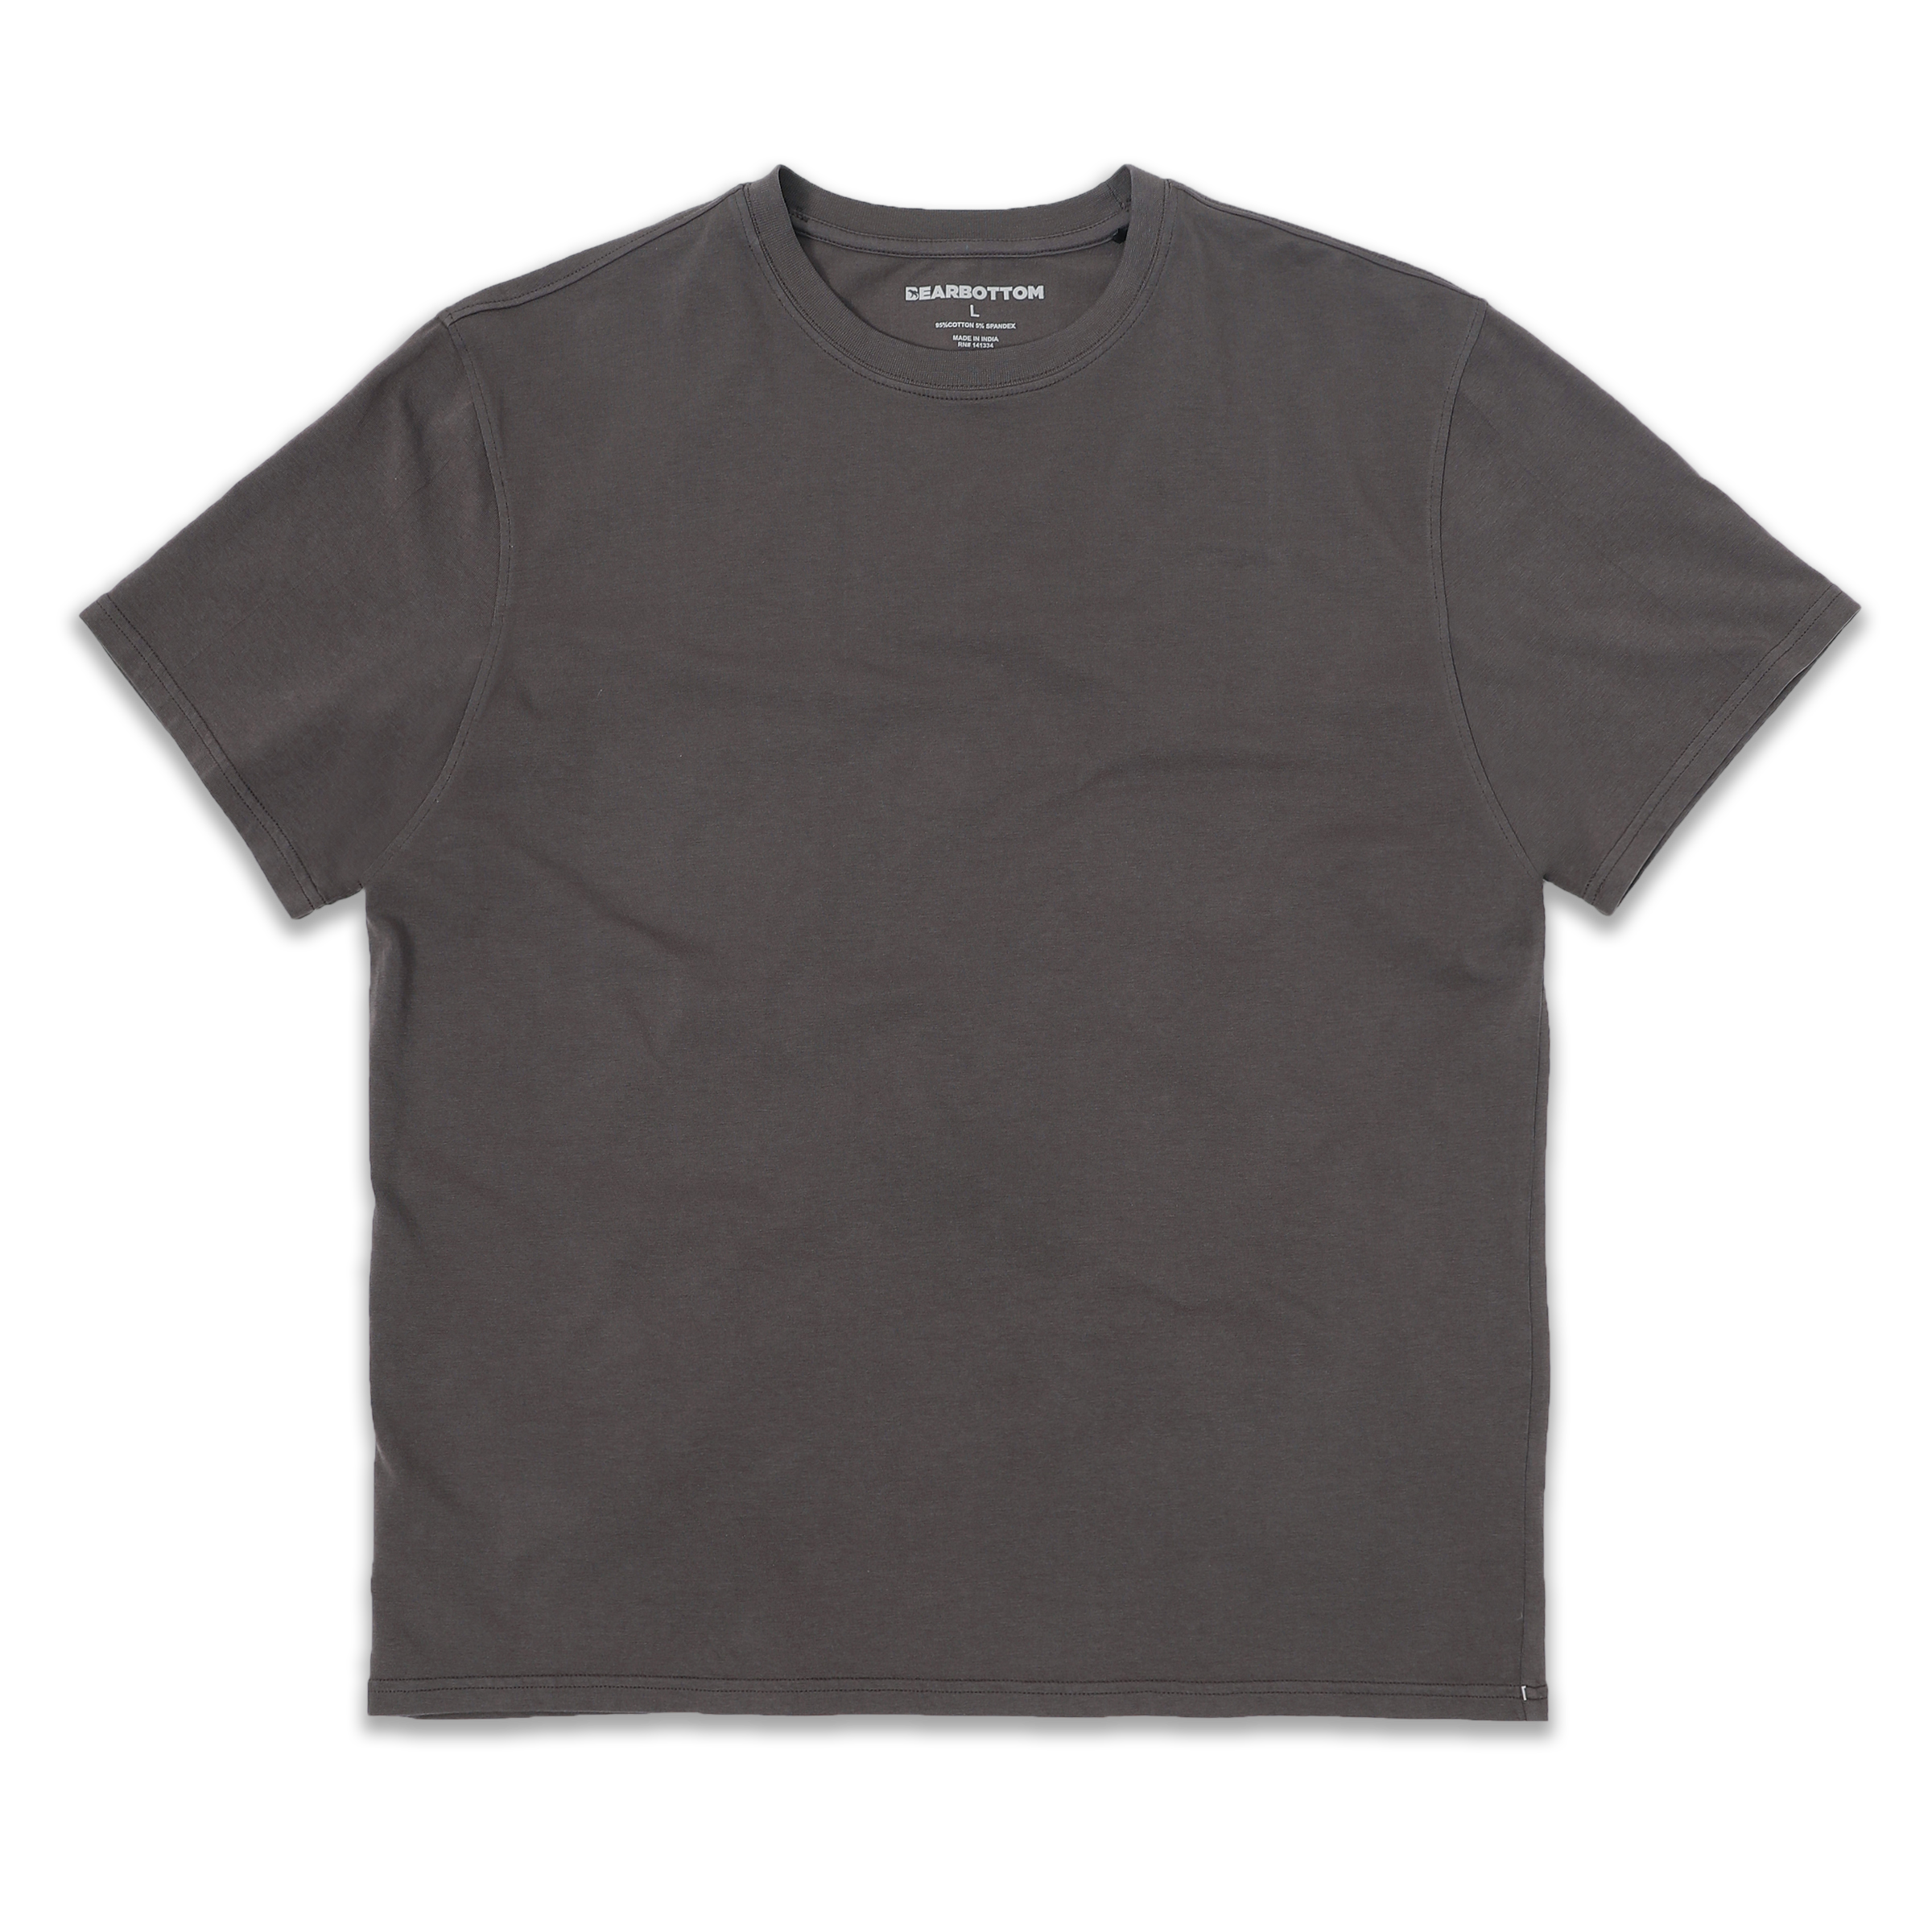 Natural Dye Tee Coal front with crewneck and short sleeves